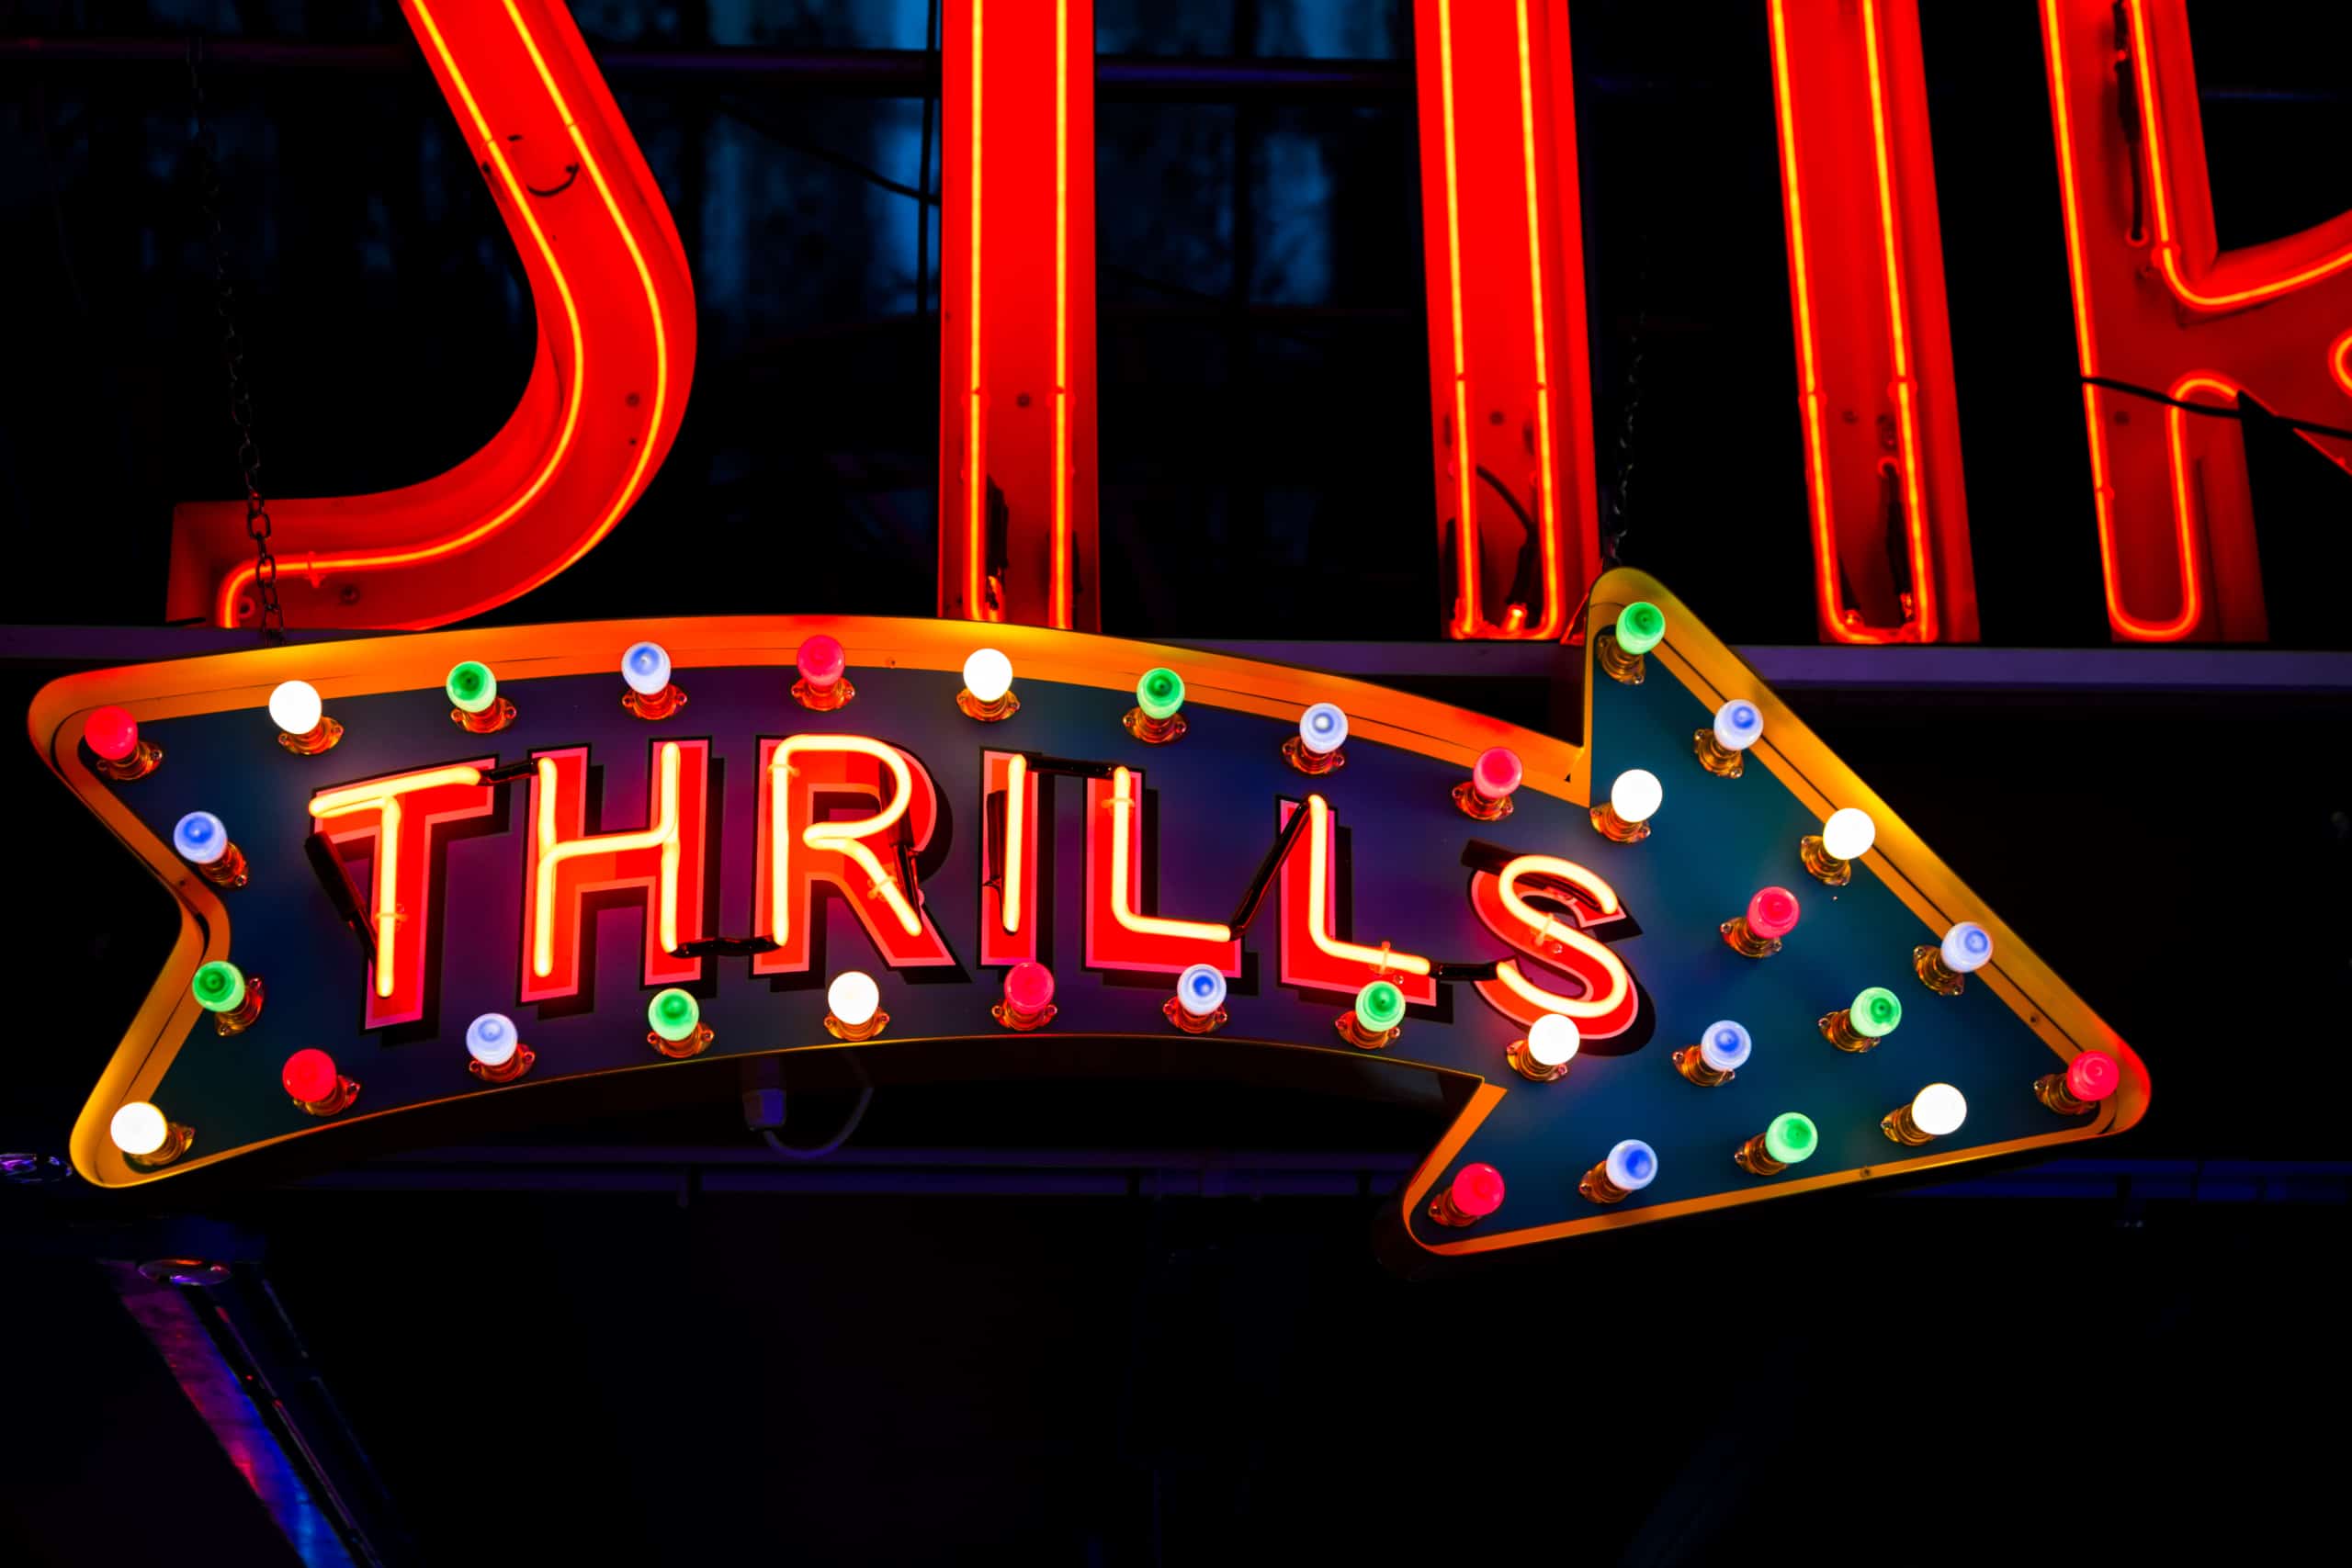 Photograph of a neon sign that reads 'Thrills'.